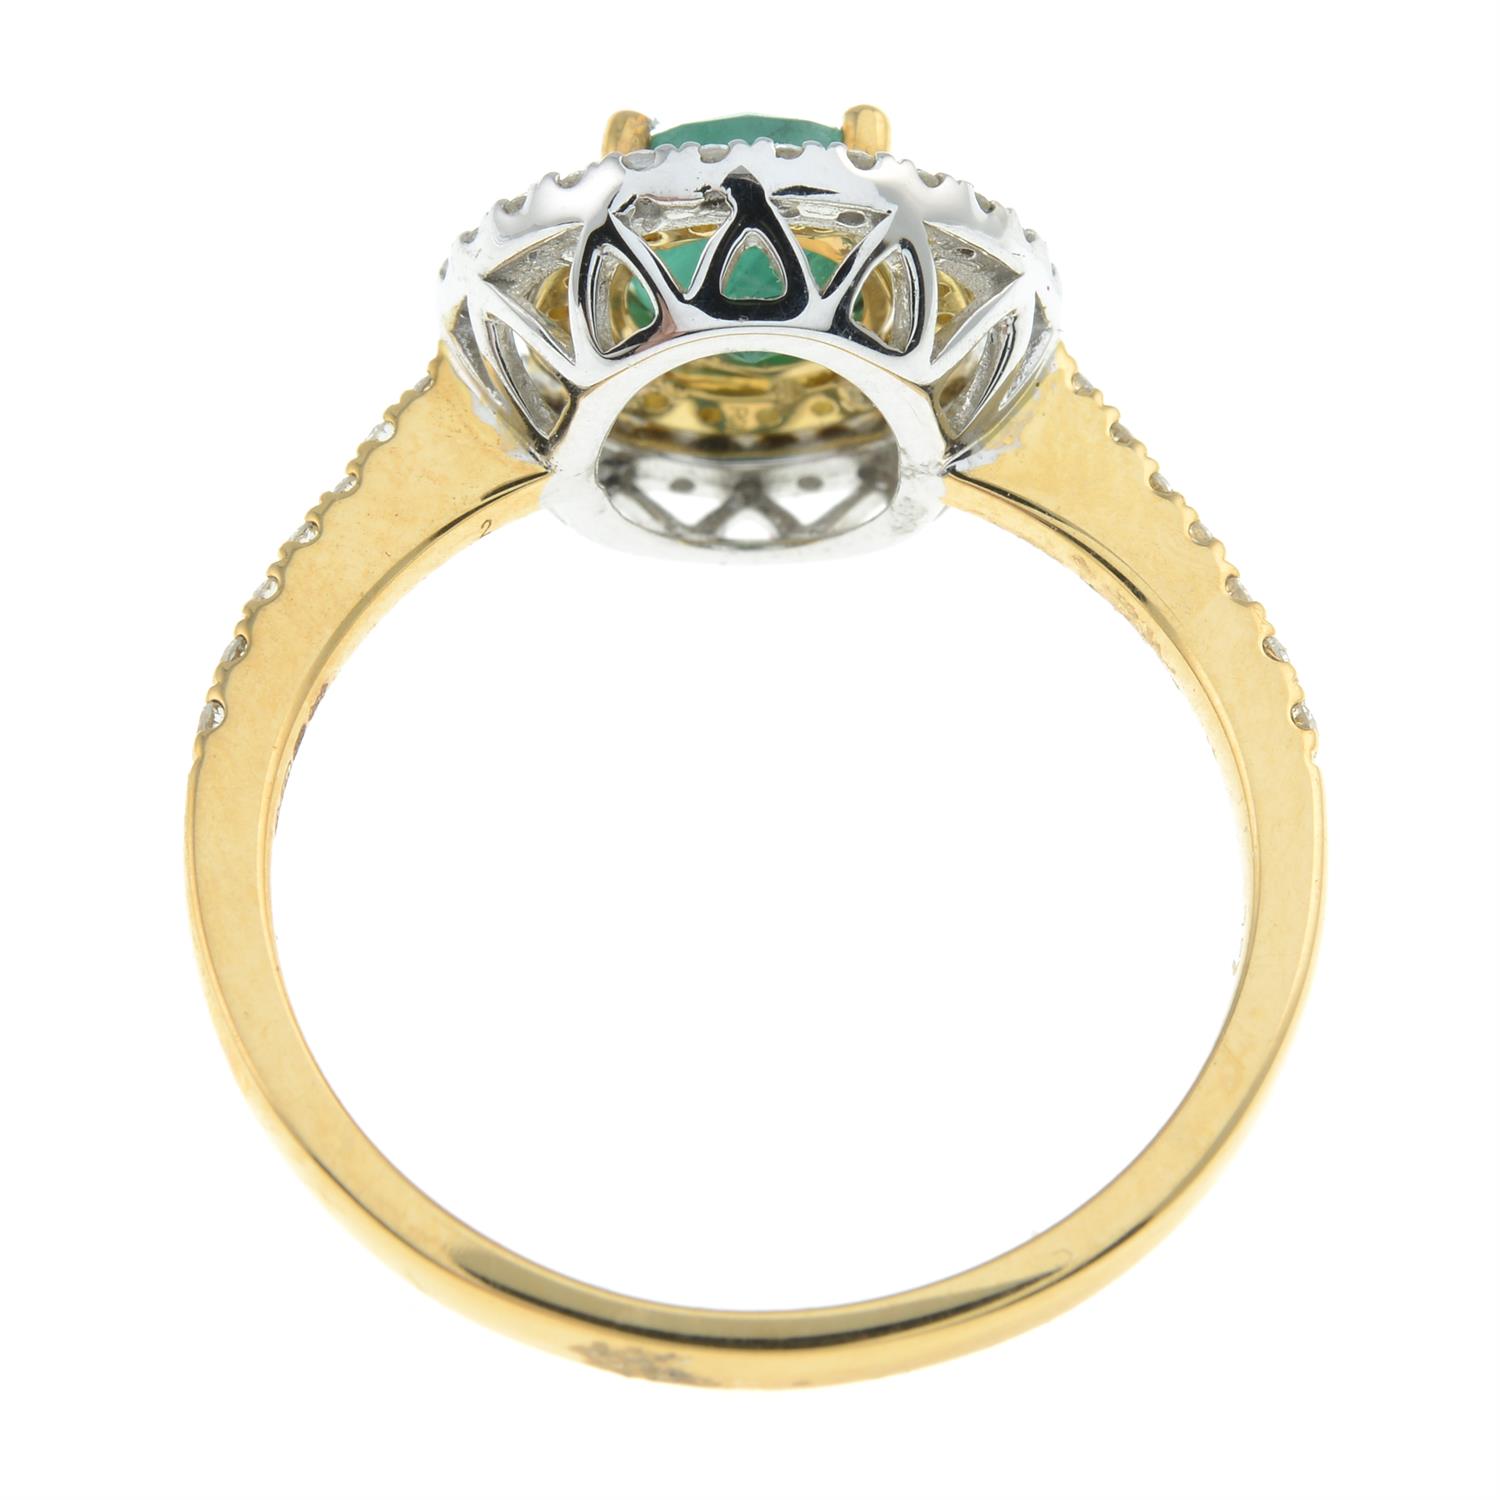 18ct gold emerald and diamond ring - Image 2 of 2